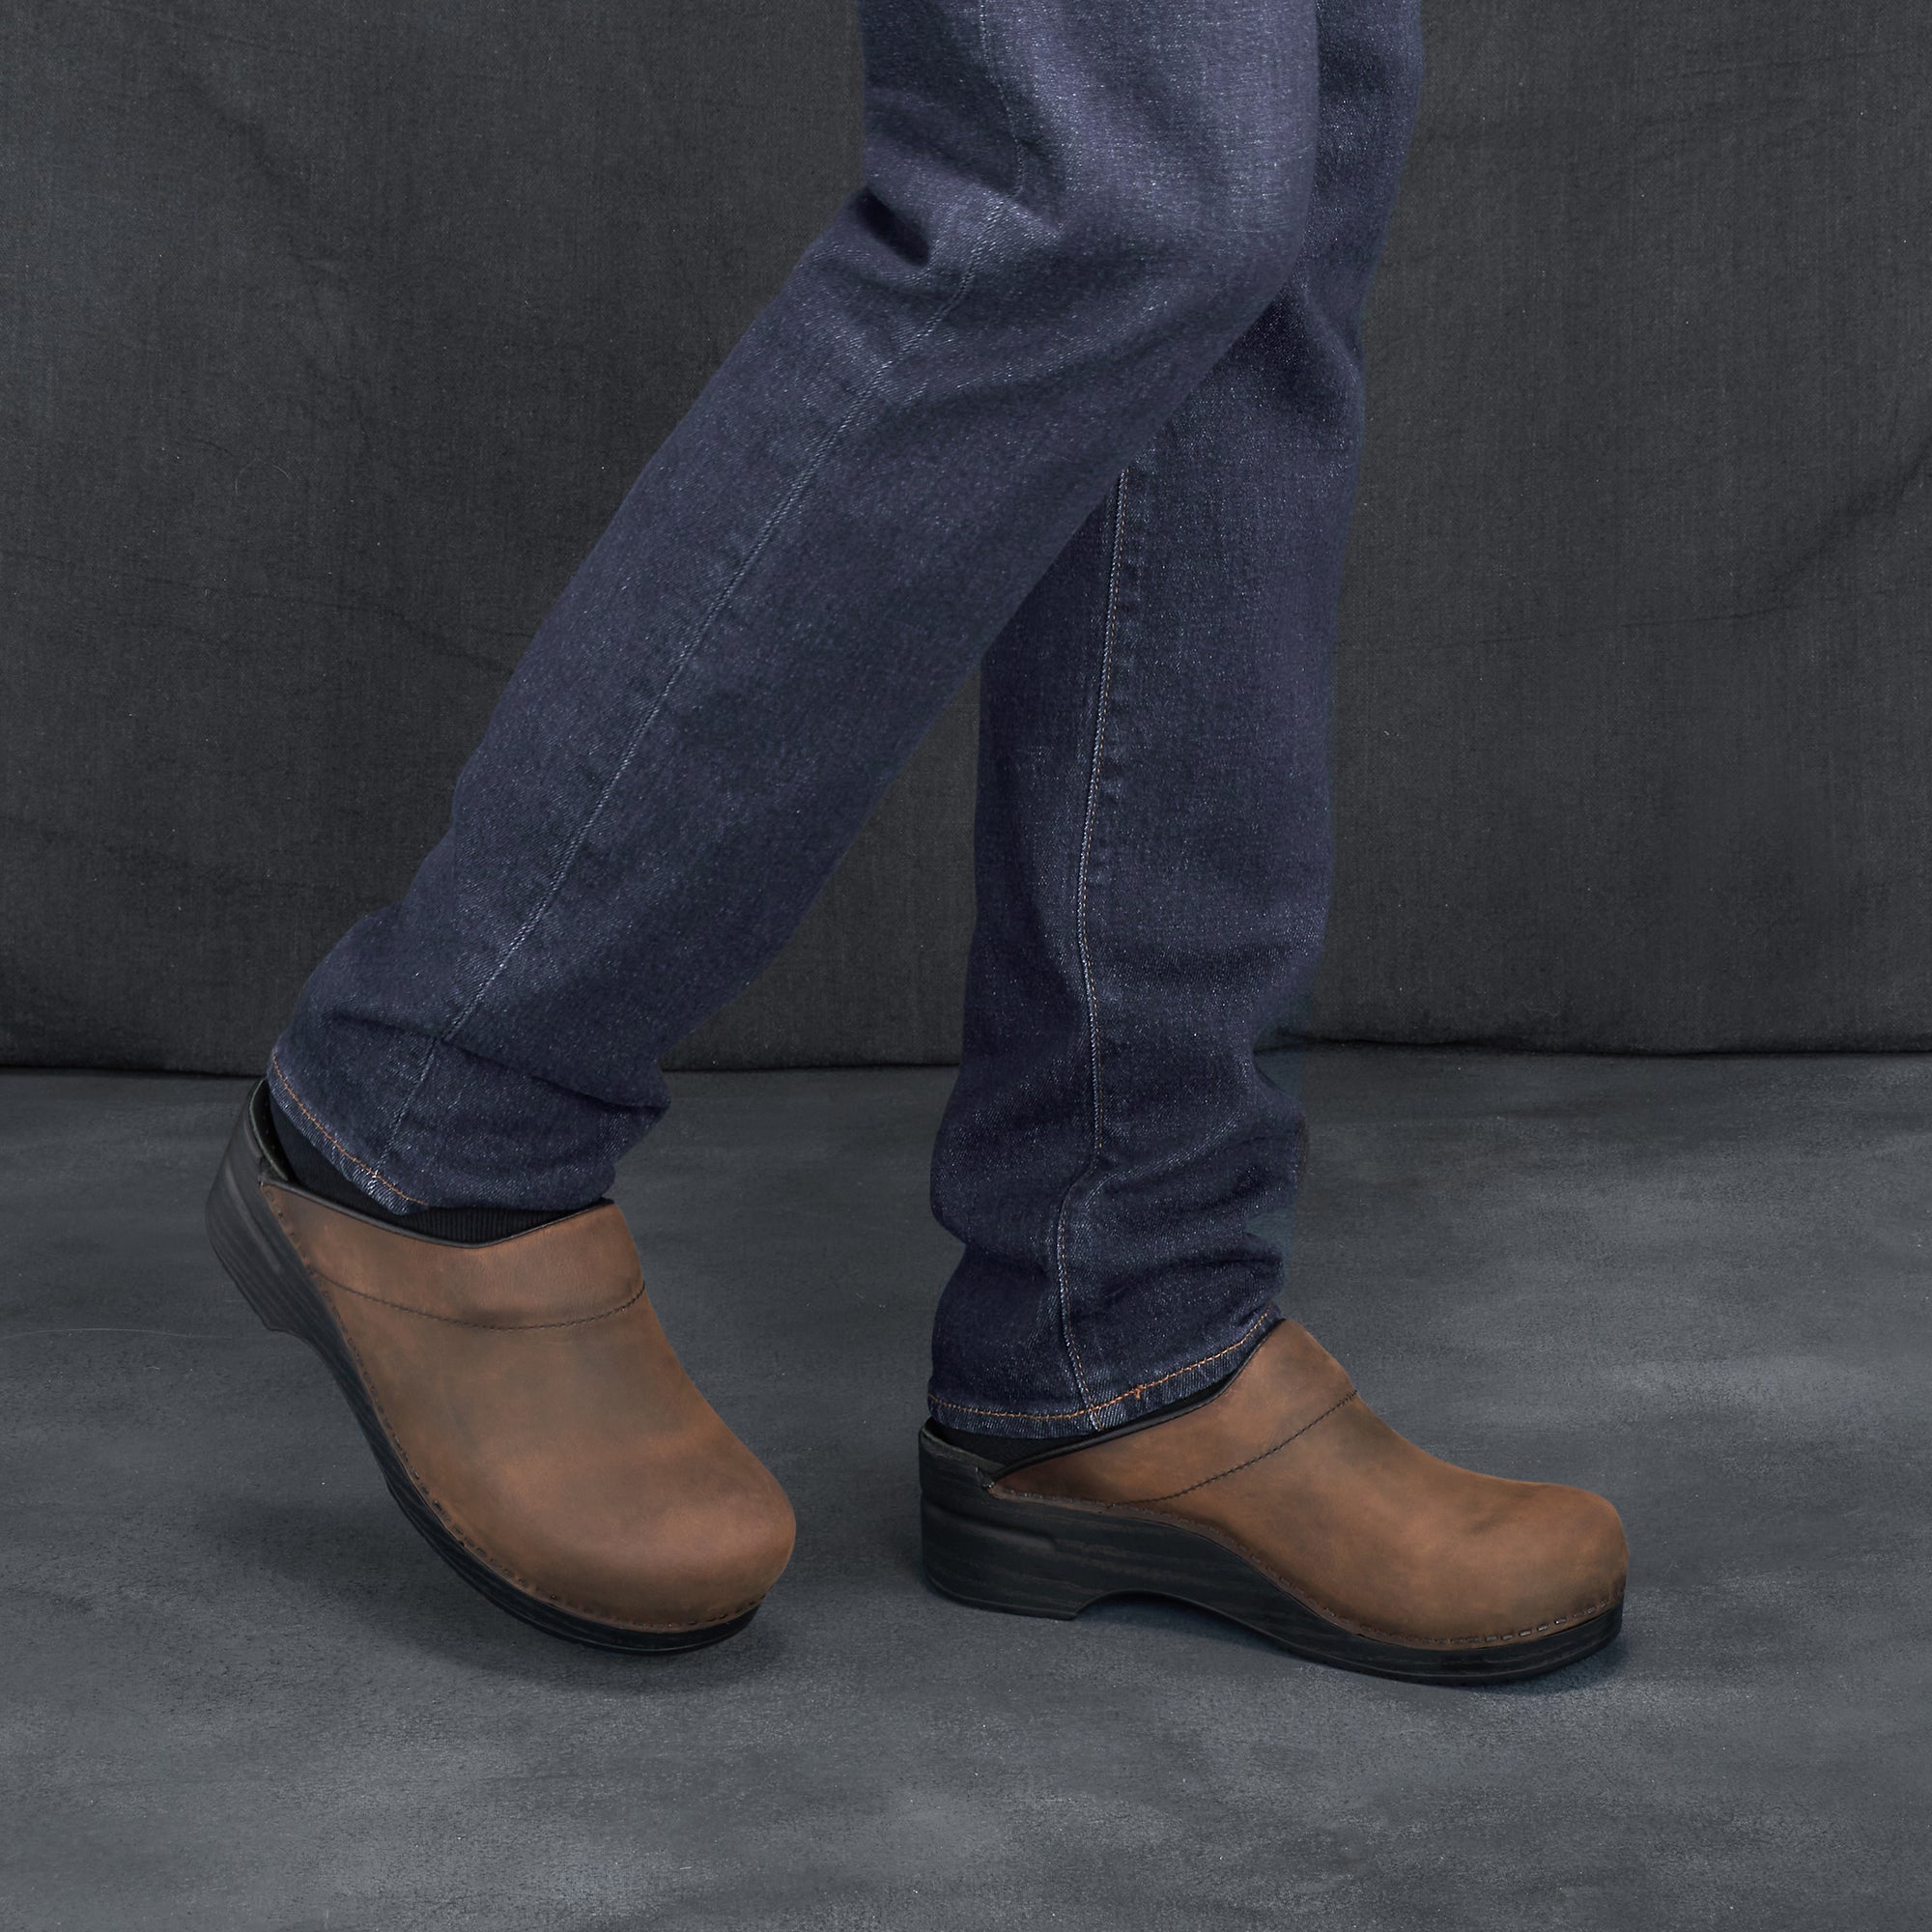 Brown Men's mule clogs with a supportive outsole.